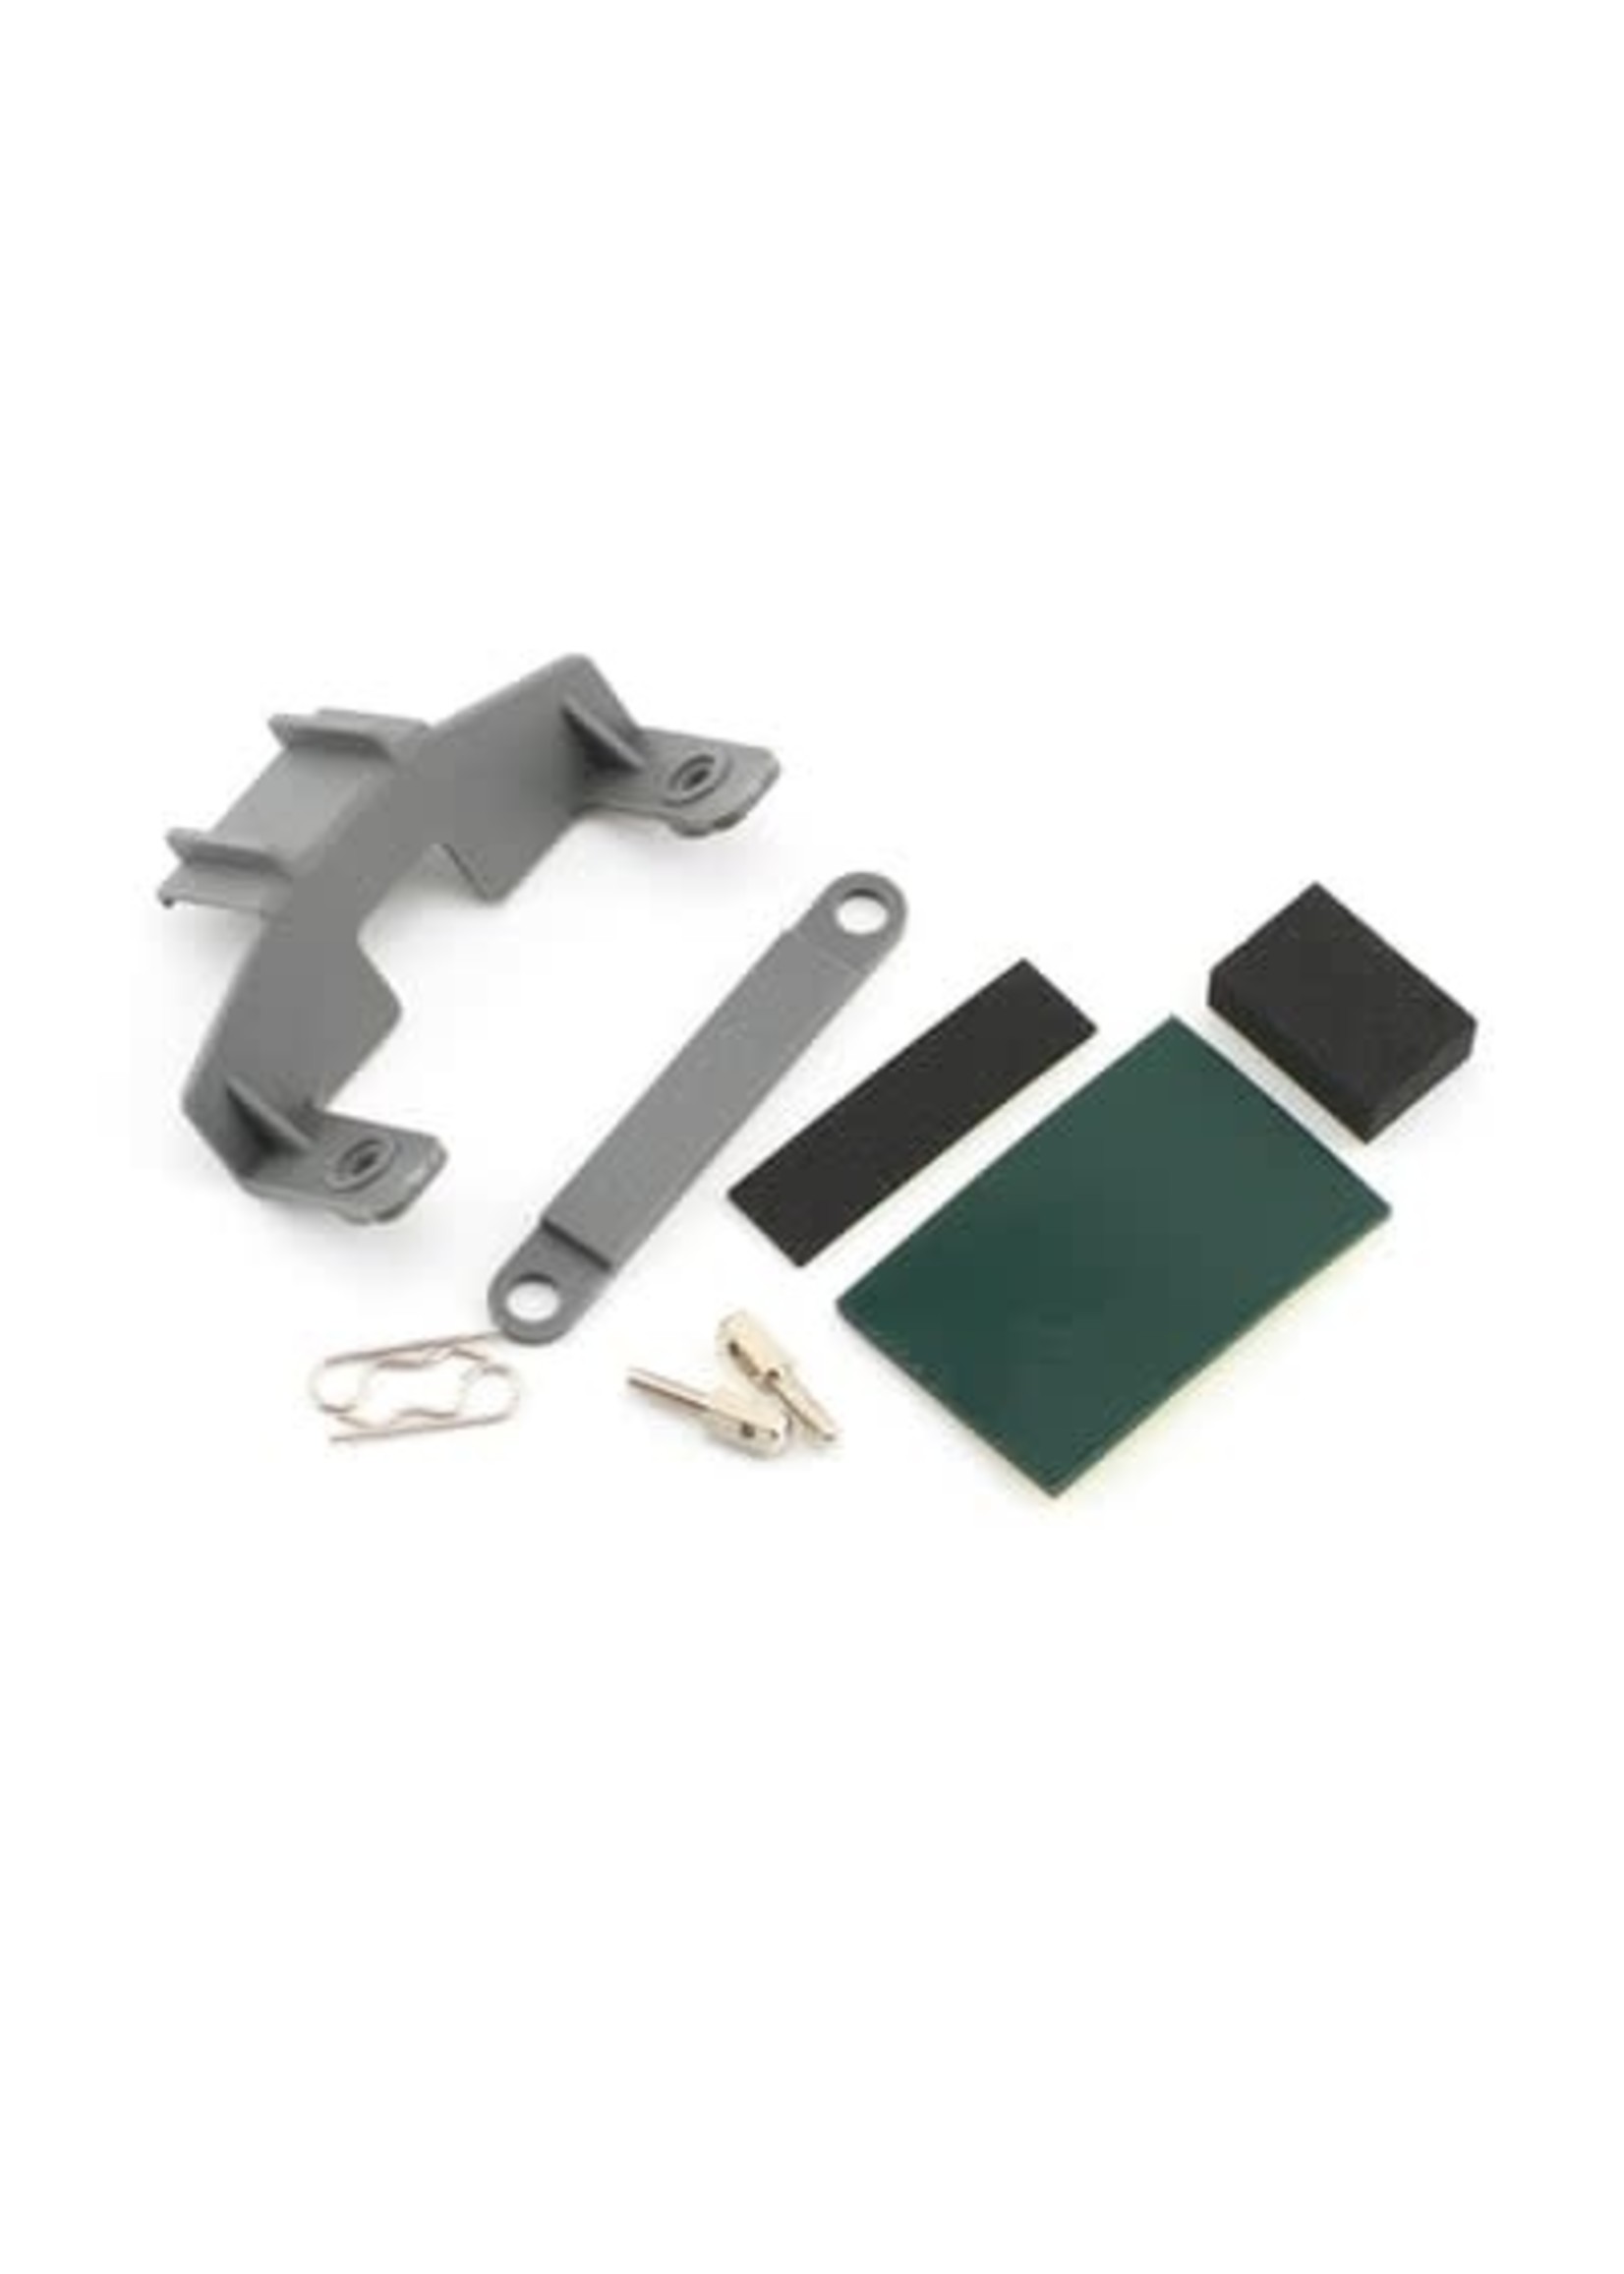 Traxxas 3627X Battery hold-down (grey) (1) / receiver hold-down (grey) (1) / metal posts (2)/ spacers (2)/ body clips (2)/ servo tape/ adhesive foam pad